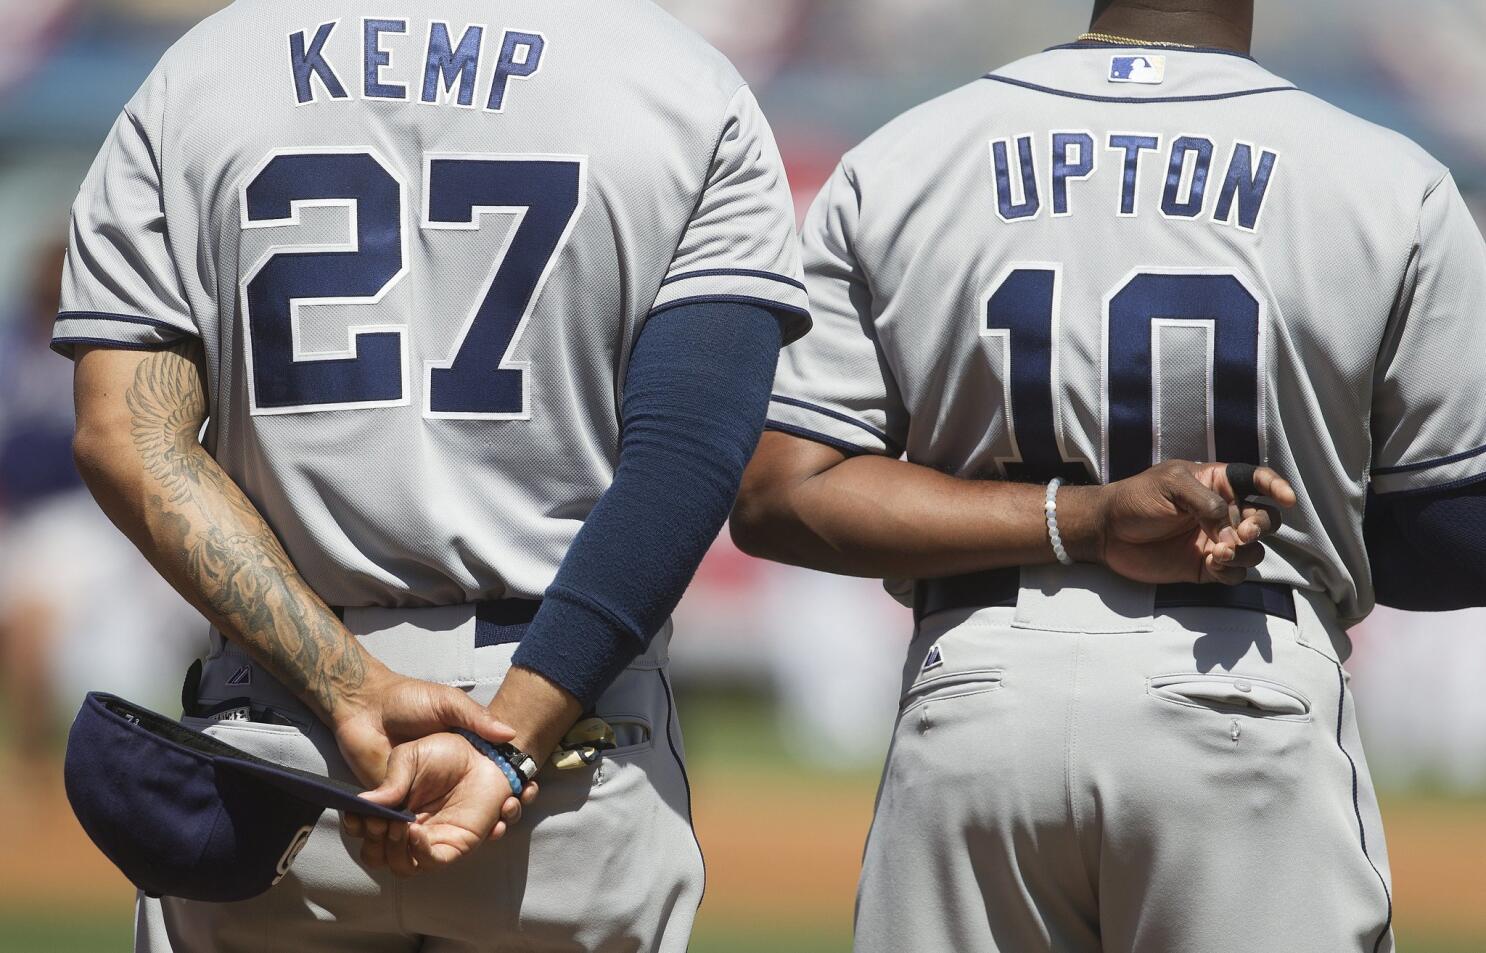 Matt Kemp May Be the Best Player in the Majors - The New York Times